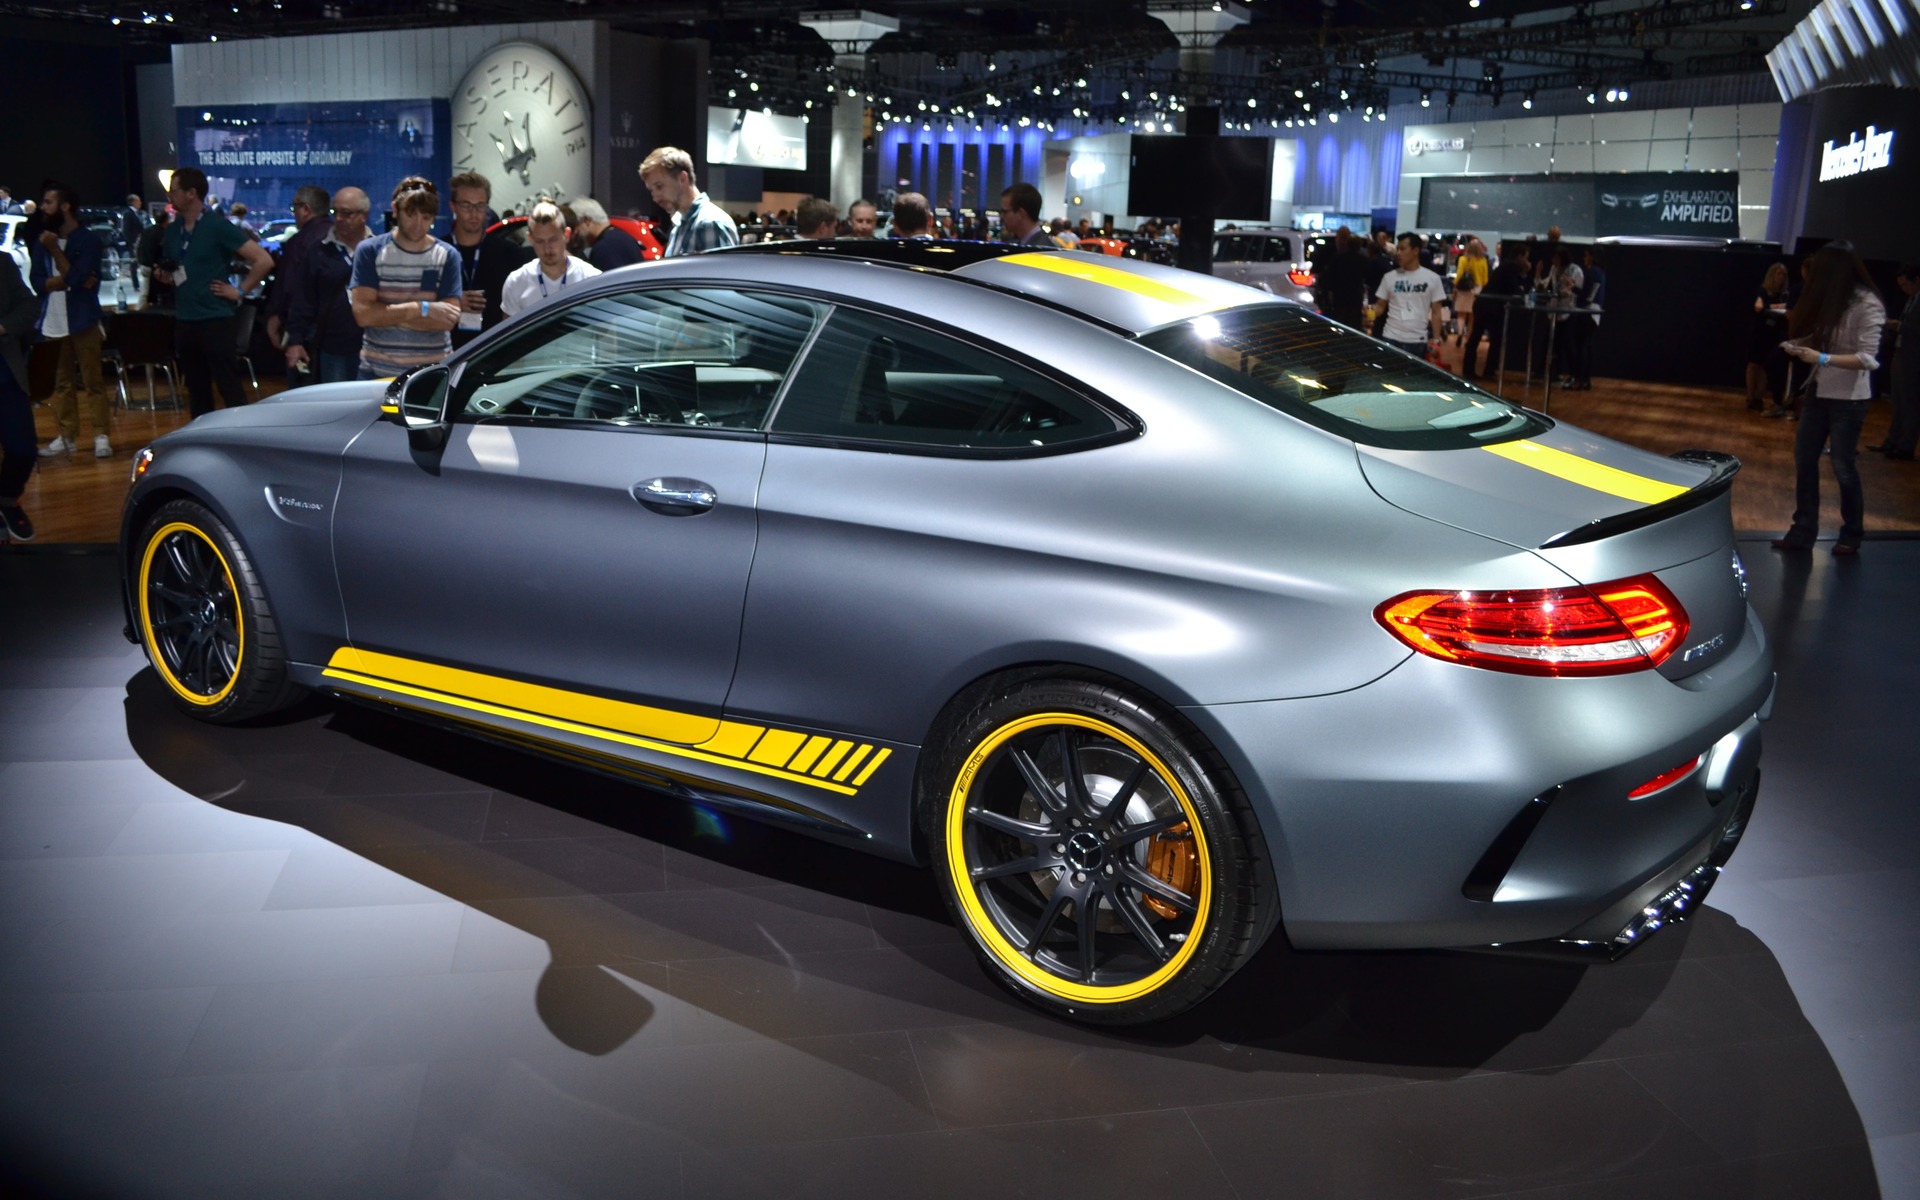 Mercedes-Benz C63 AMG Coupe Edition One